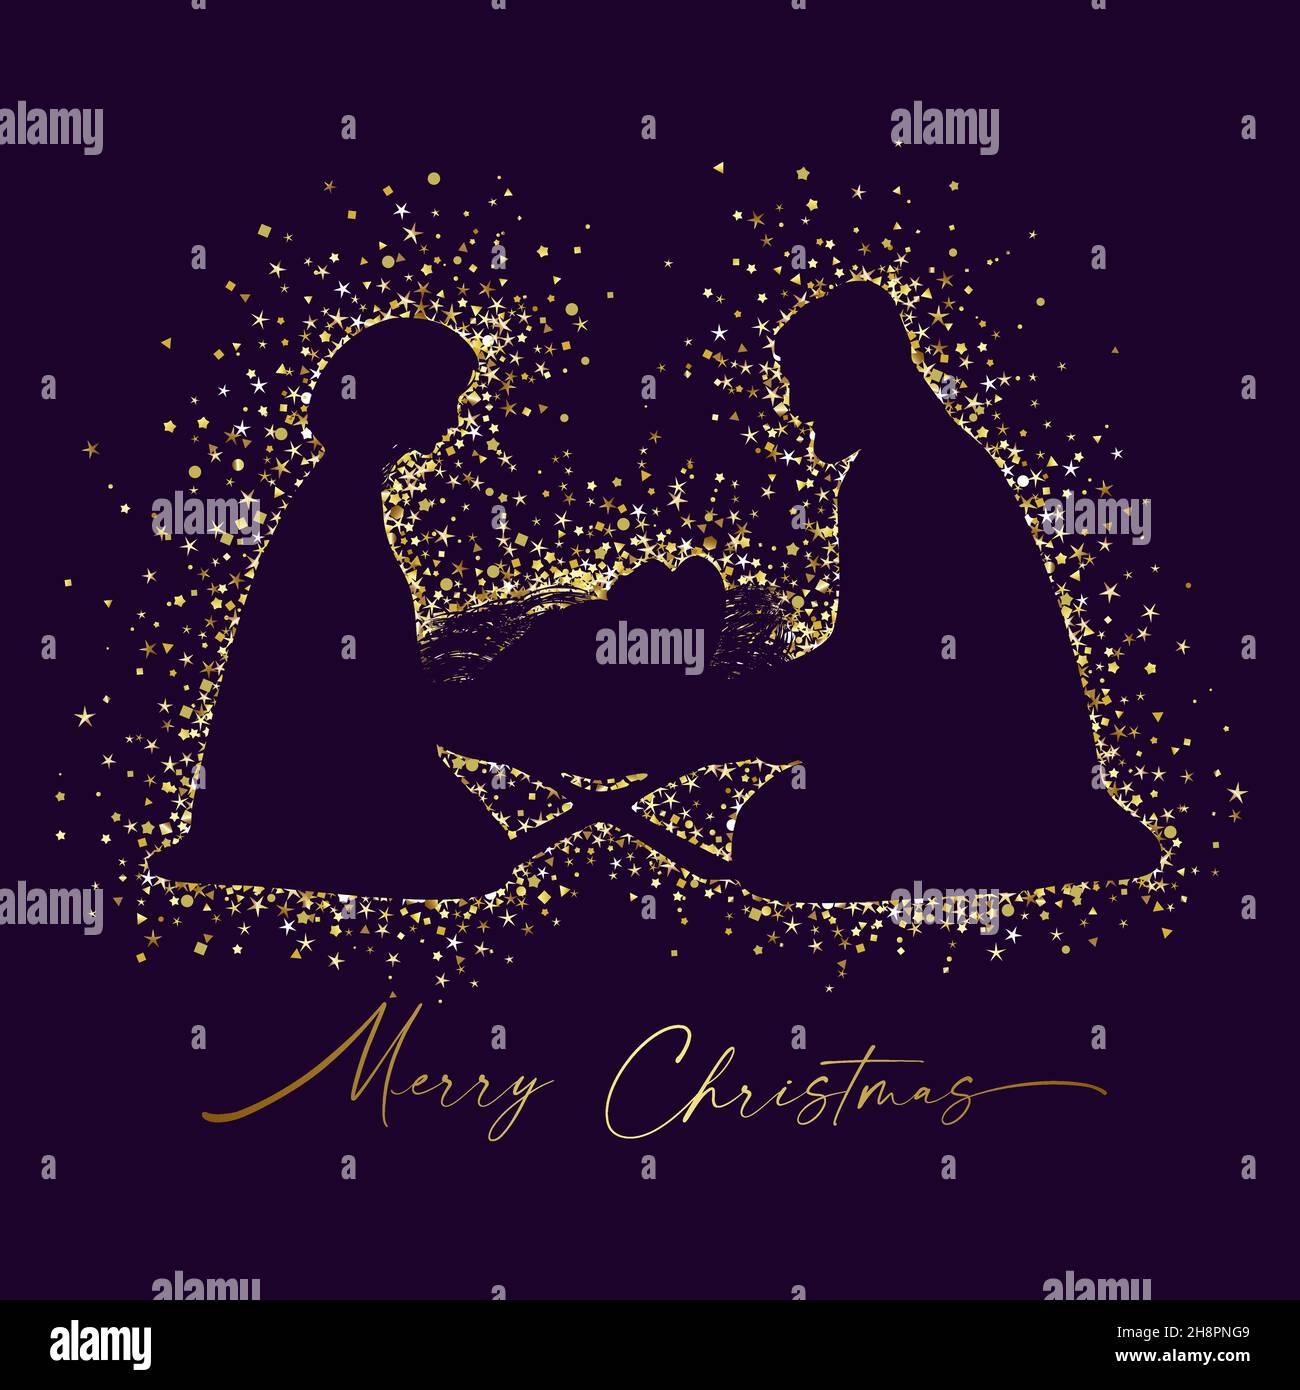 Christmas scene of baby Jesus in the manger with Mary and Joseph. Christian Nativity with handwriting style calligraphic text Merry Christmas. Square Stock Vector